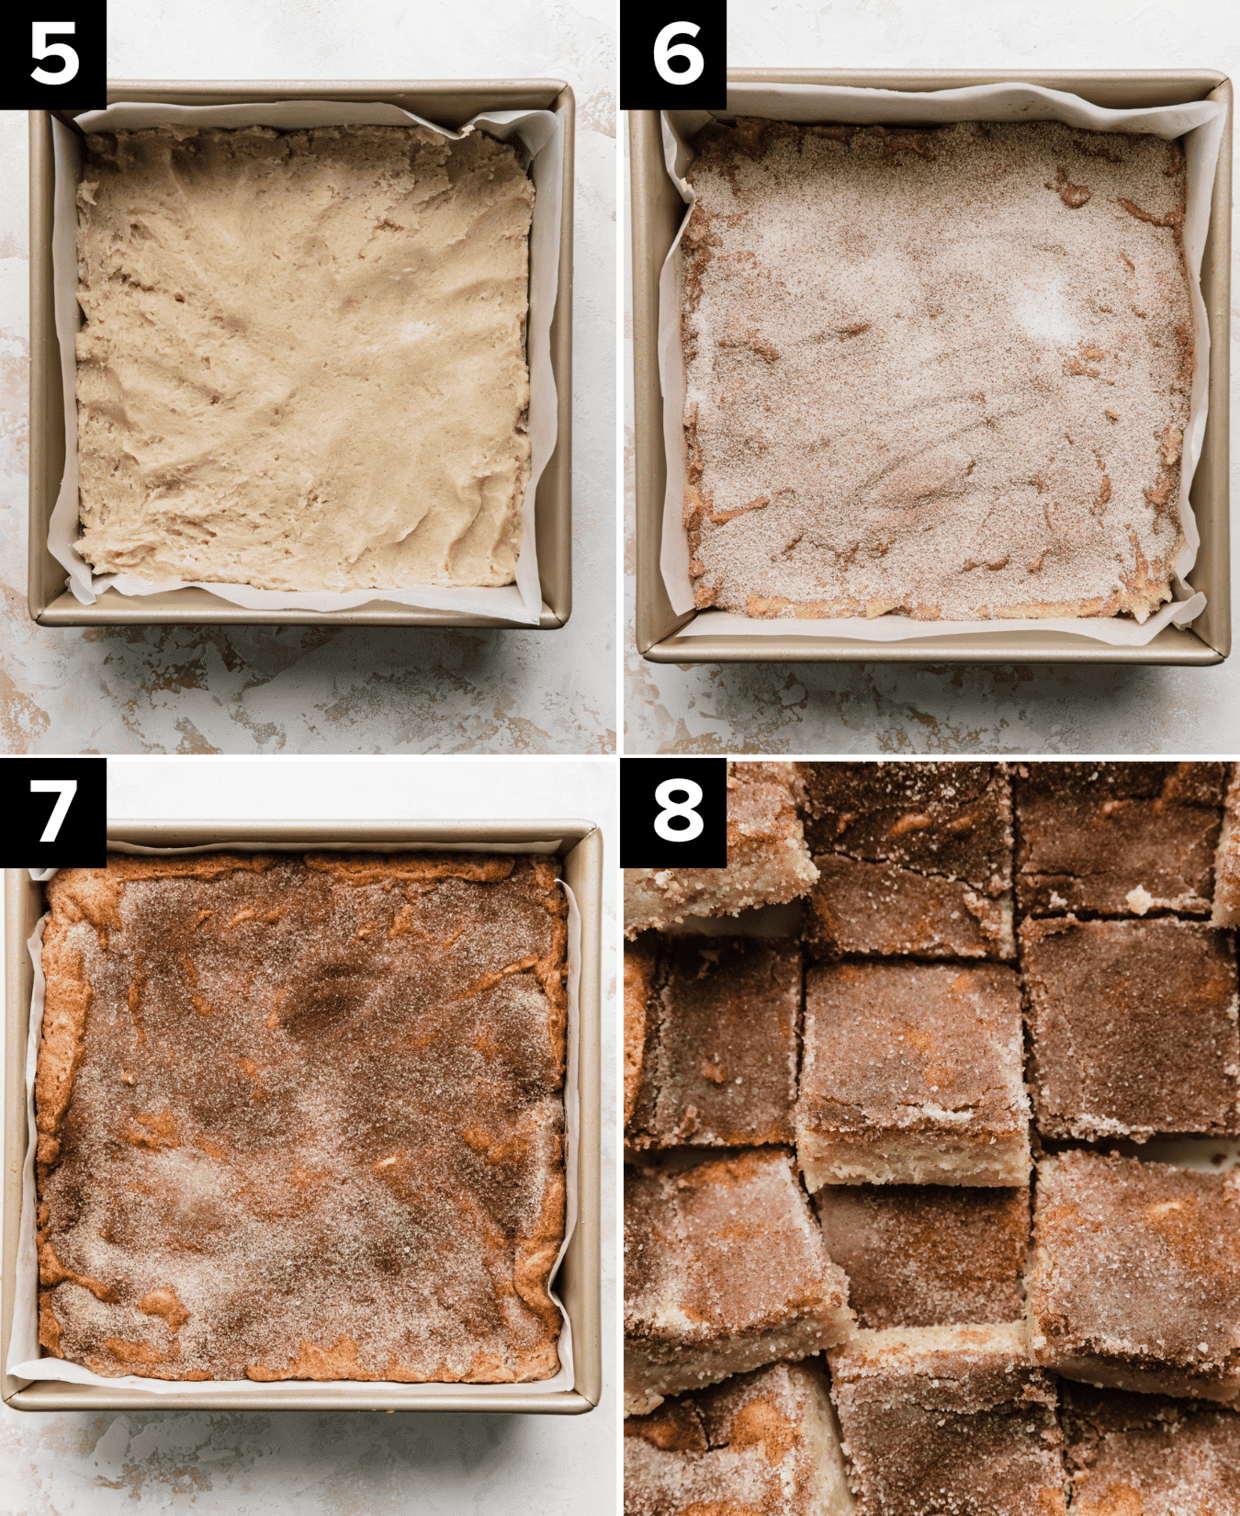 Four photos showing snickerdoodle bars in a square pan prior to baking, then after baking and cut into squares.